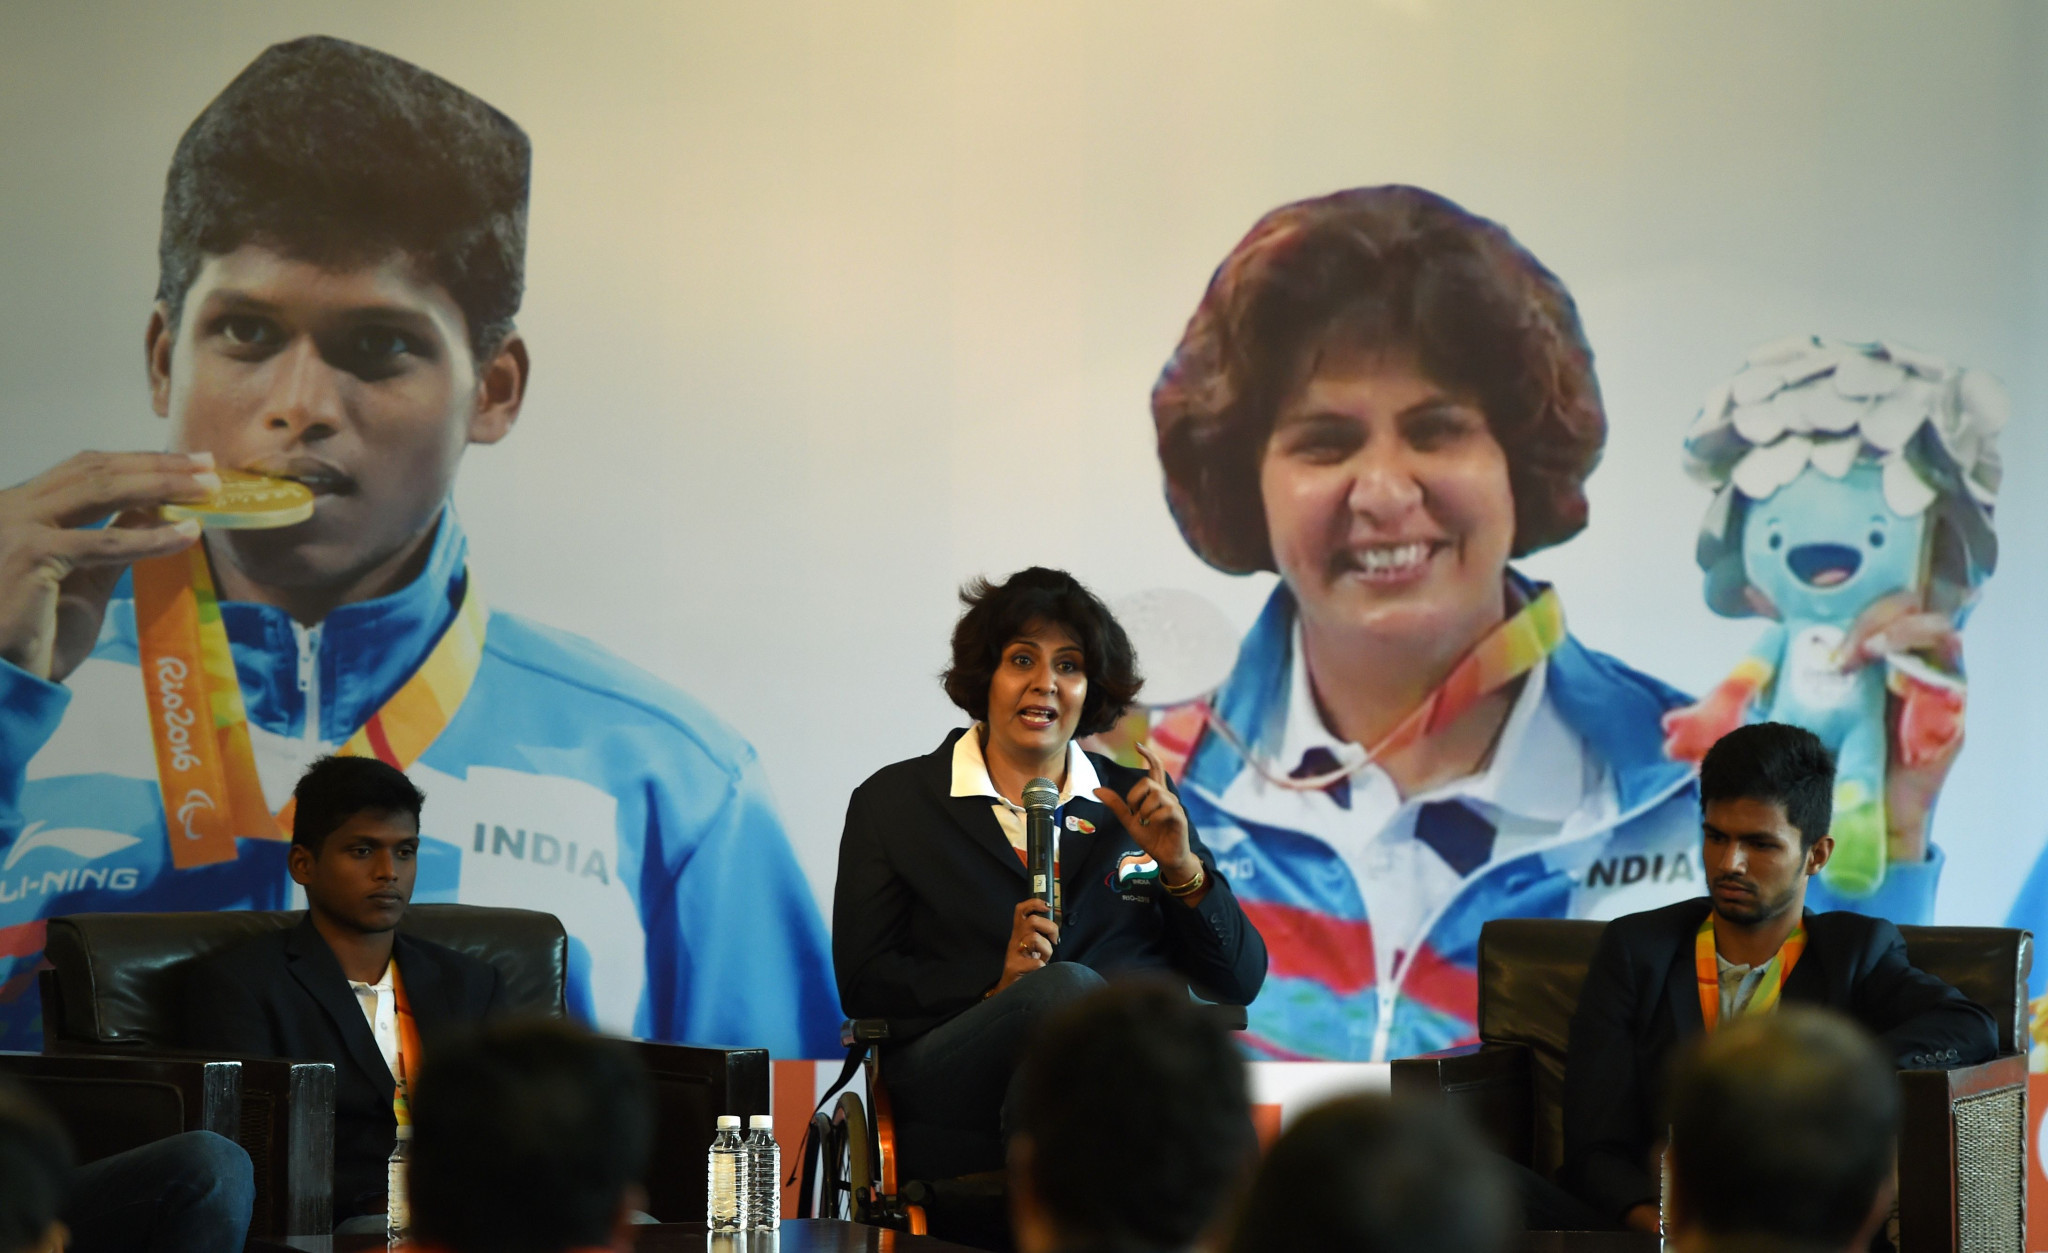 Deepa Malik was the first Indian woman to win a medal at the Paralympic Games ©Getty Images